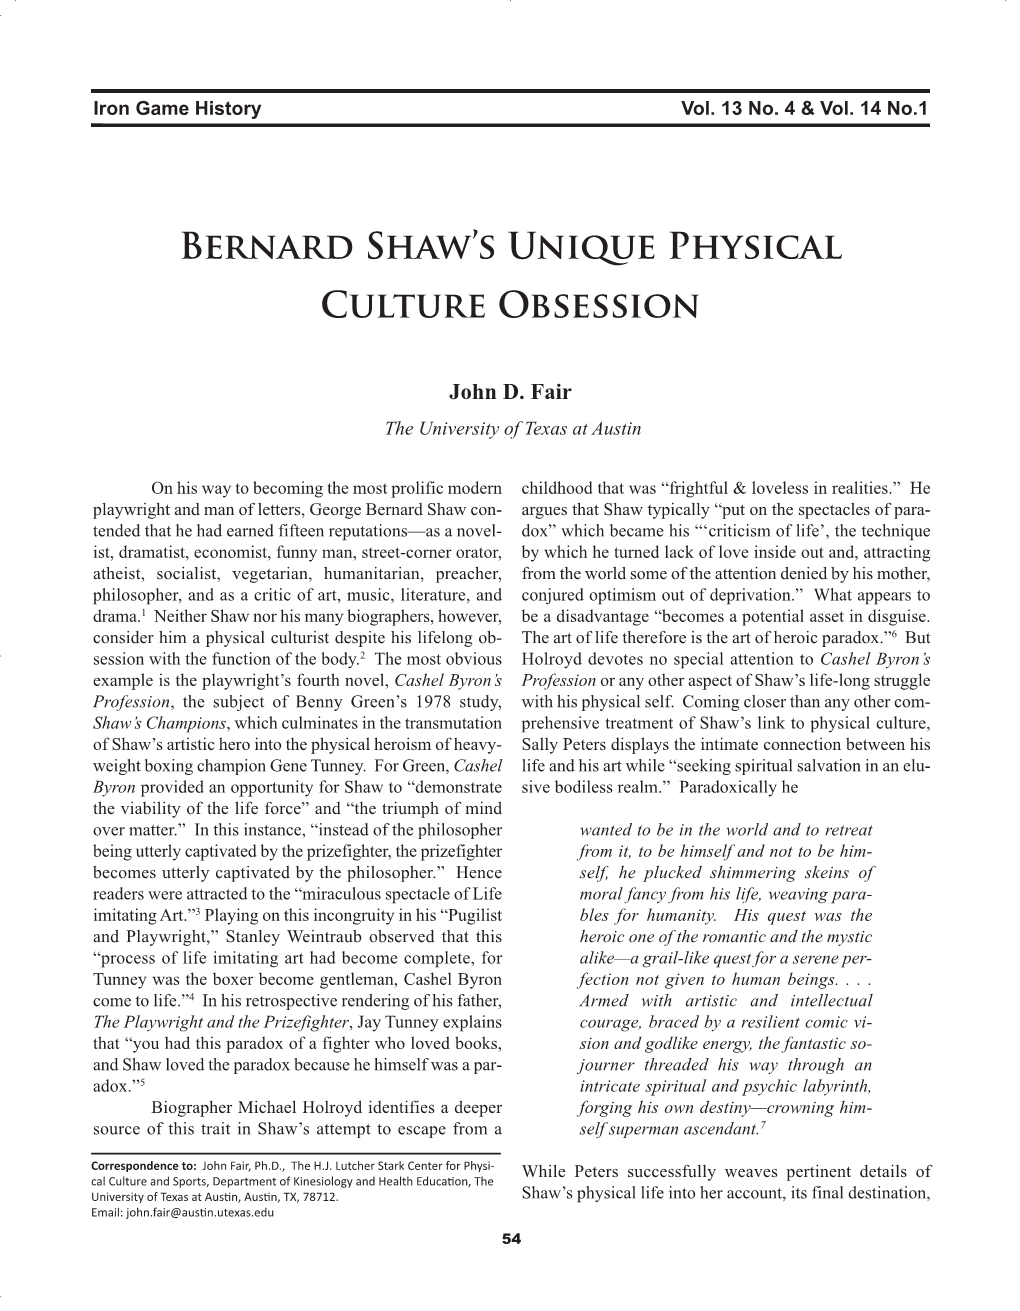 Bernard Shaw's Unique Physical Culture Obsession